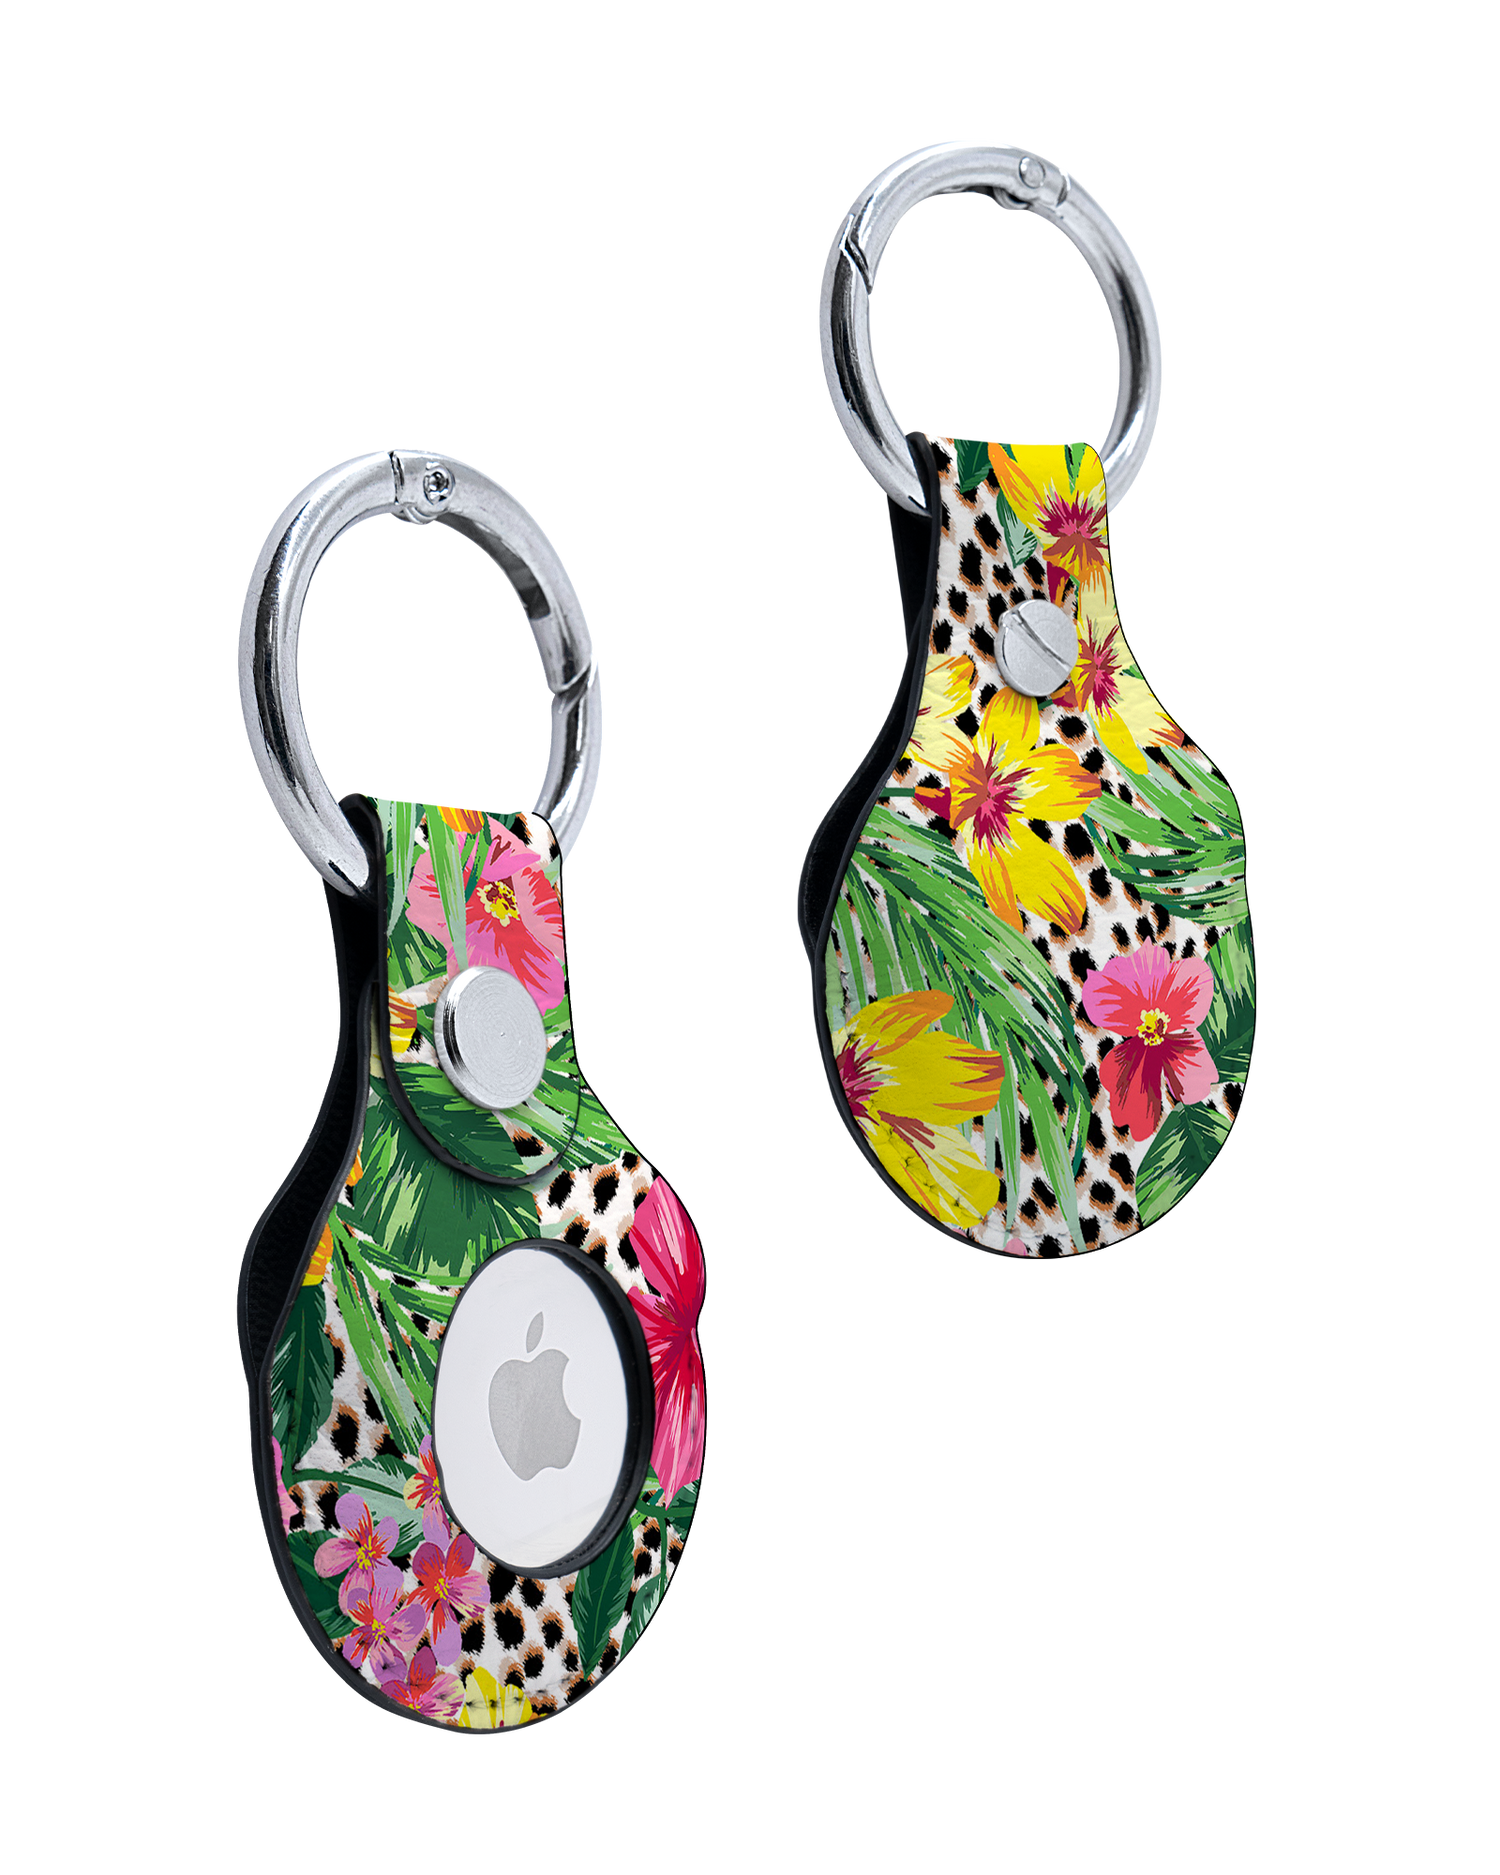 AirTag Holder with Tropical Cheetah Design: Front and Back